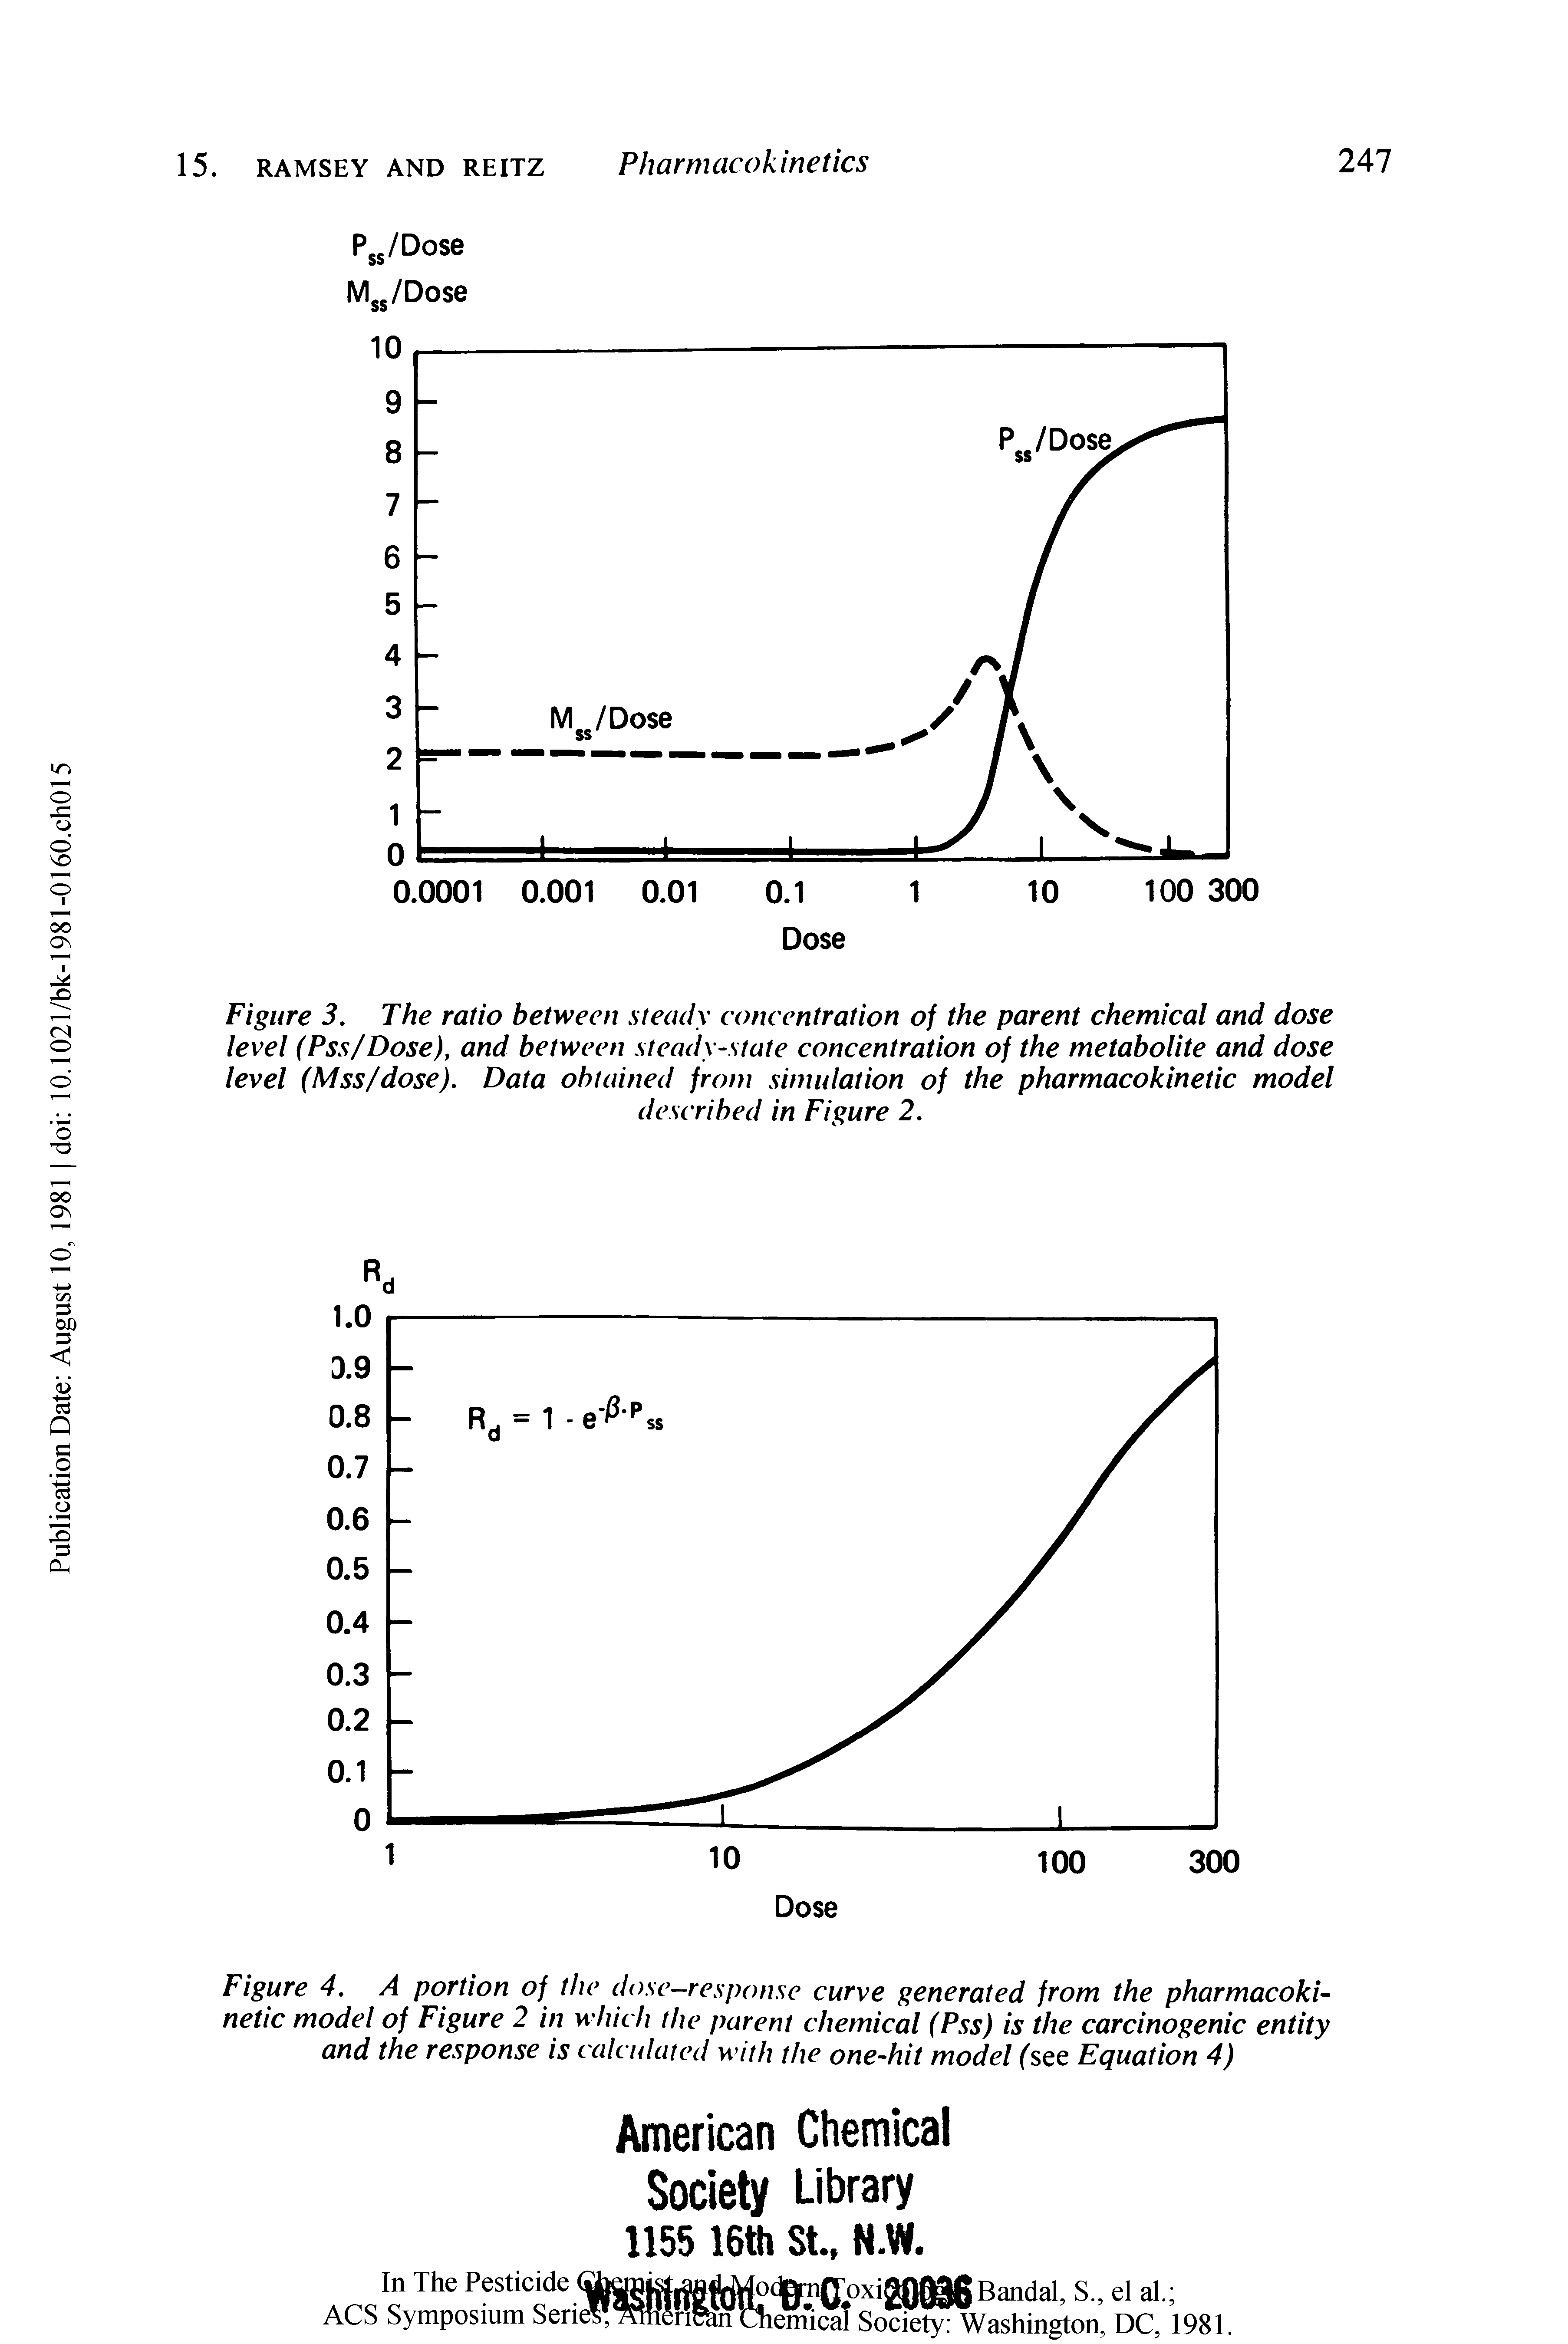 Figure 4. A portion of the dose-response curve generated from the pharmacokinetic model of Figure 2 in which the parent chemical (Pss) is the carcinogenic entity and the response is calculated with the one-hit model ( see Equation 4)...